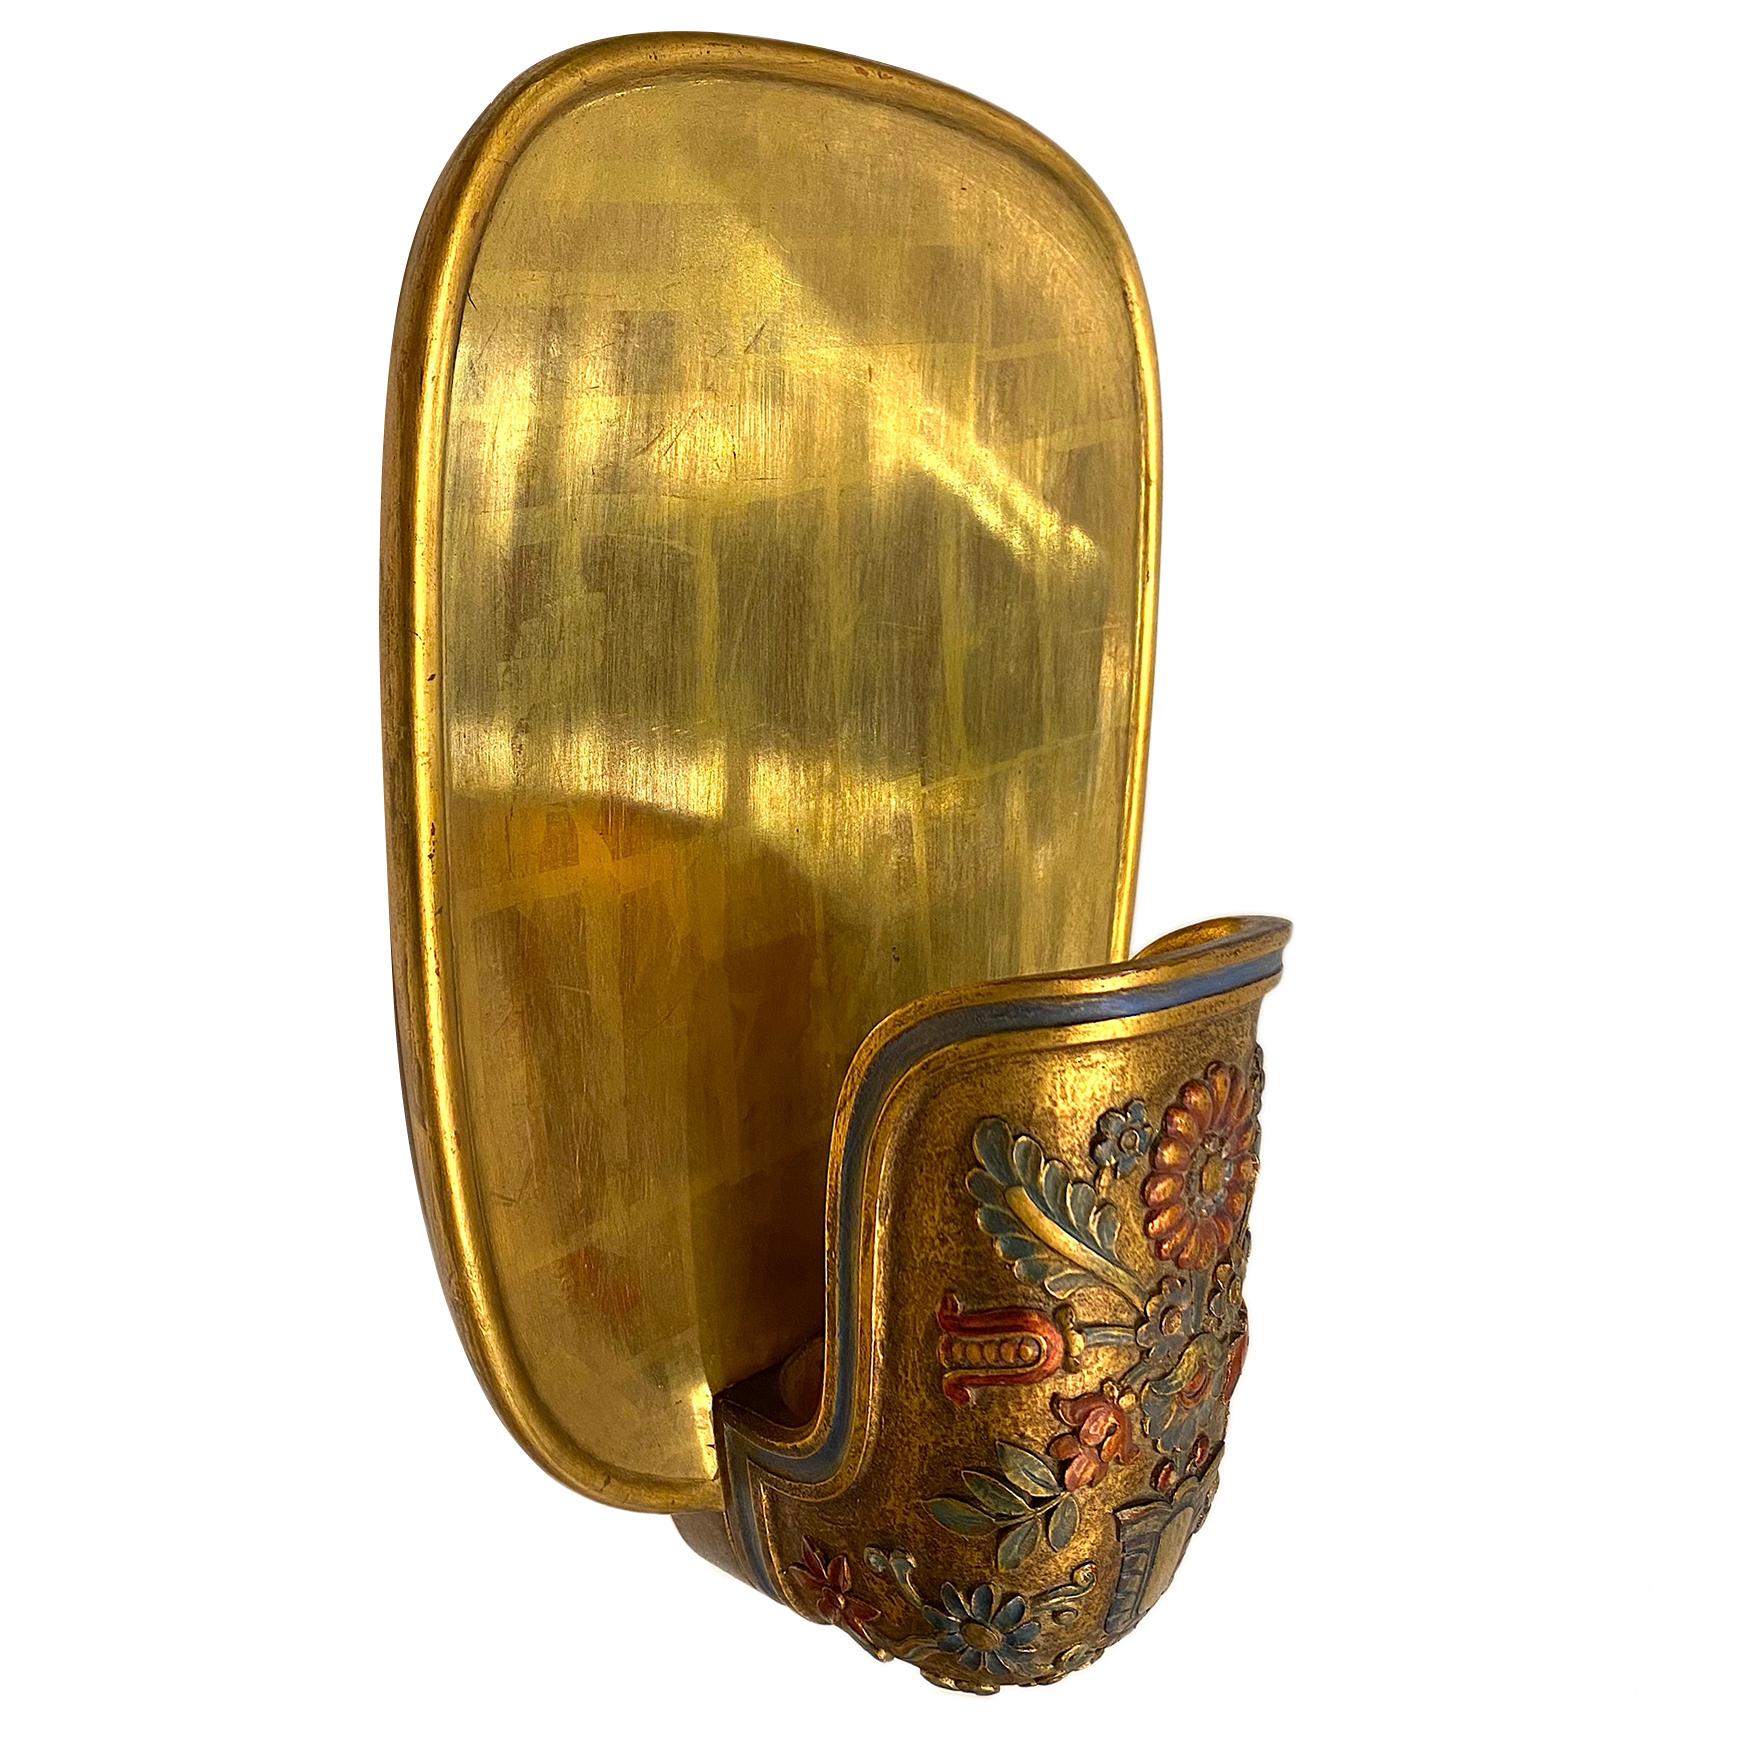 Pair of circa 1950s painted and gilt wood sconces with original patina.

Measurements:
Height: 14.25